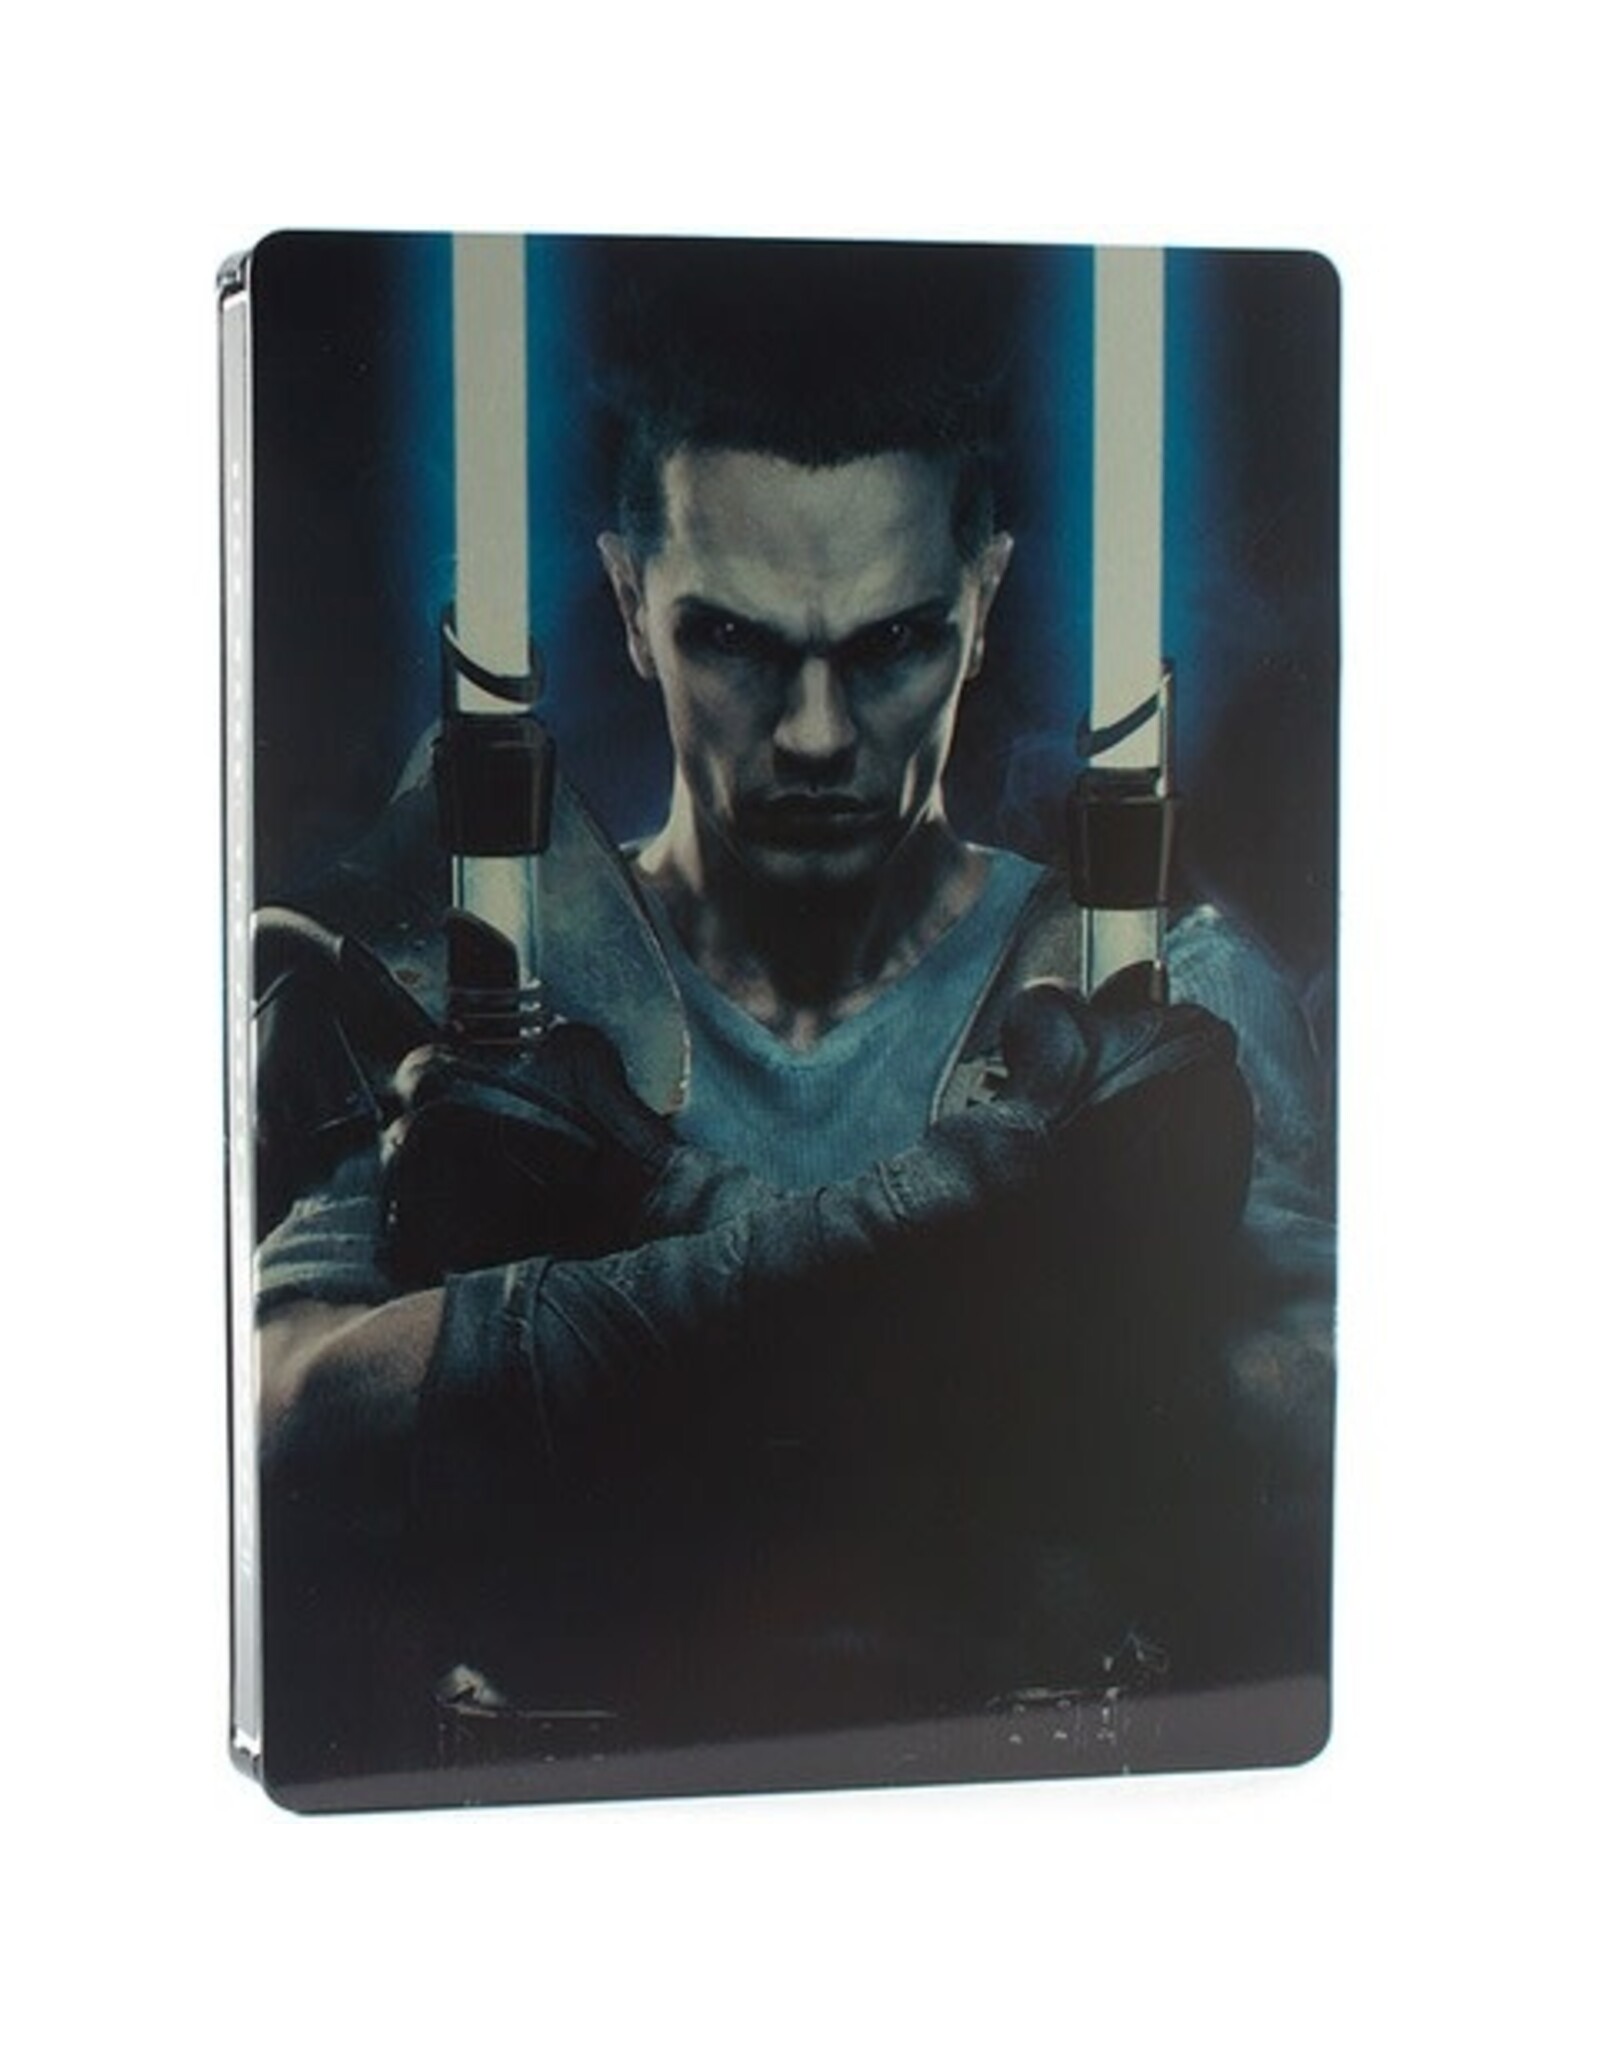 Xbox 360 Star Wars: The Force Unleashed II Collector's Edition (Steelbook and Game Only, Damaged Steelbook)